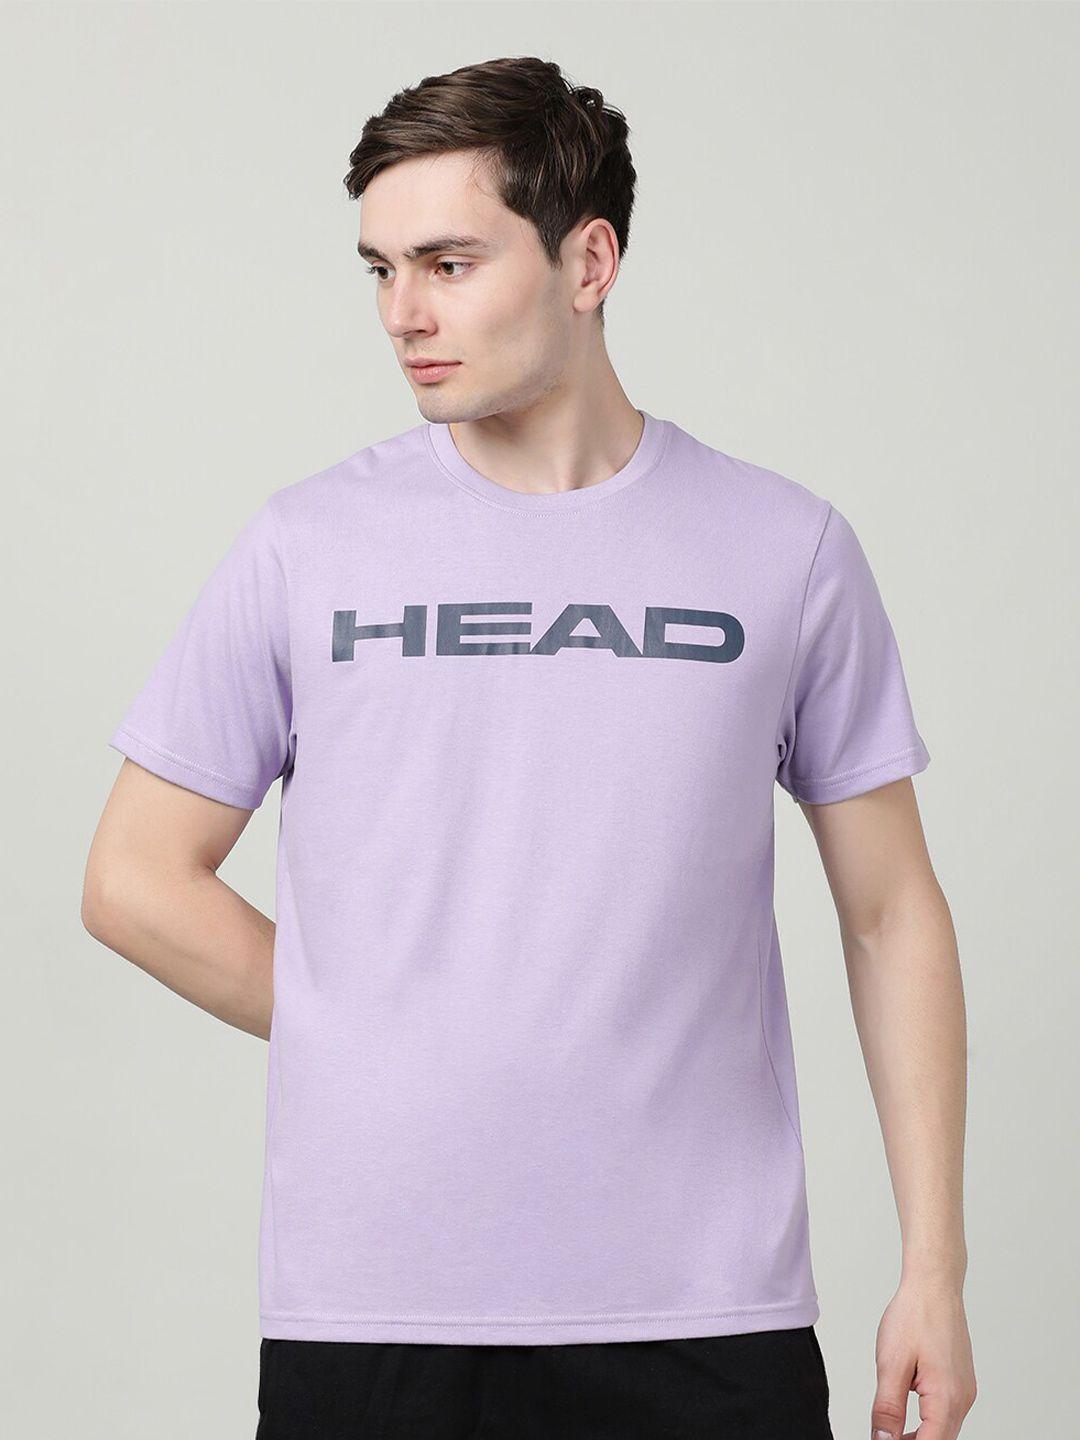 head-typography-printed-cotton-t-shirt